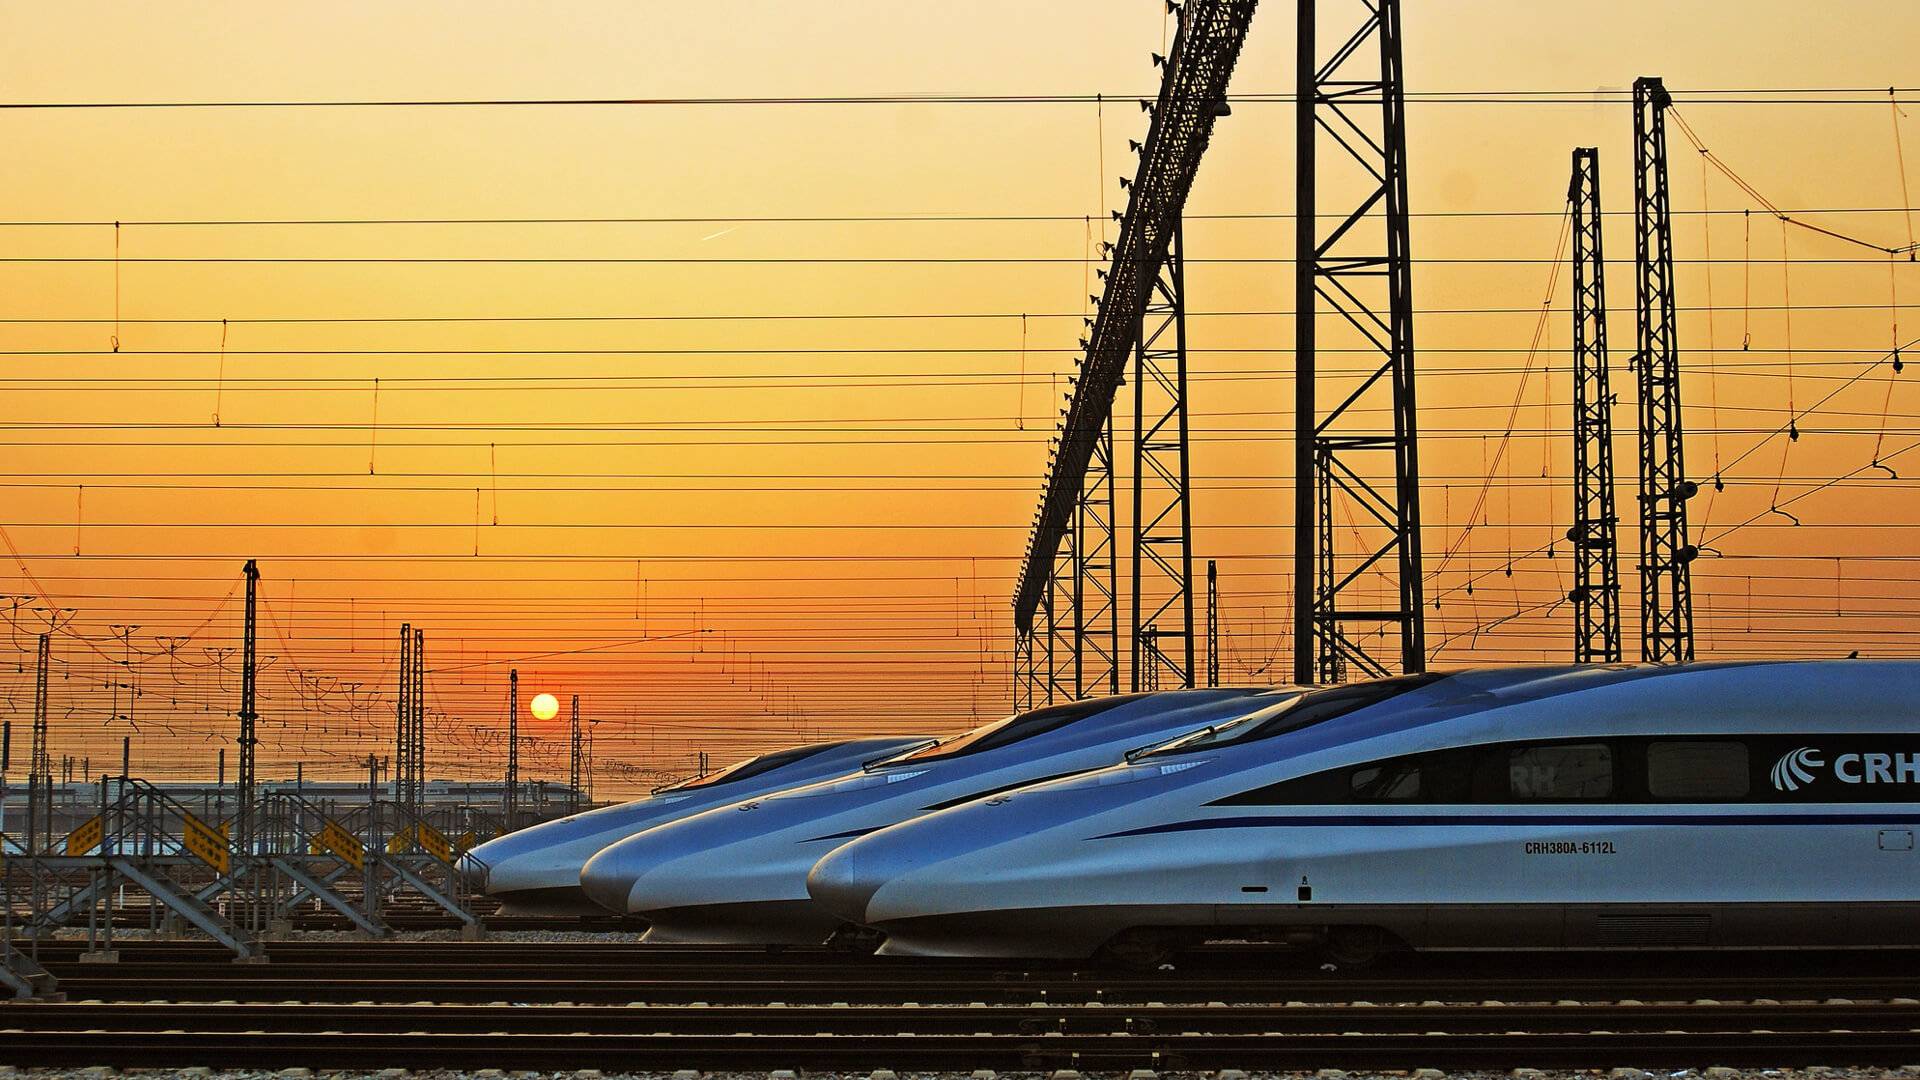 The streamlined noses of three high speed trains stopped on tracks, with a sunset in the background